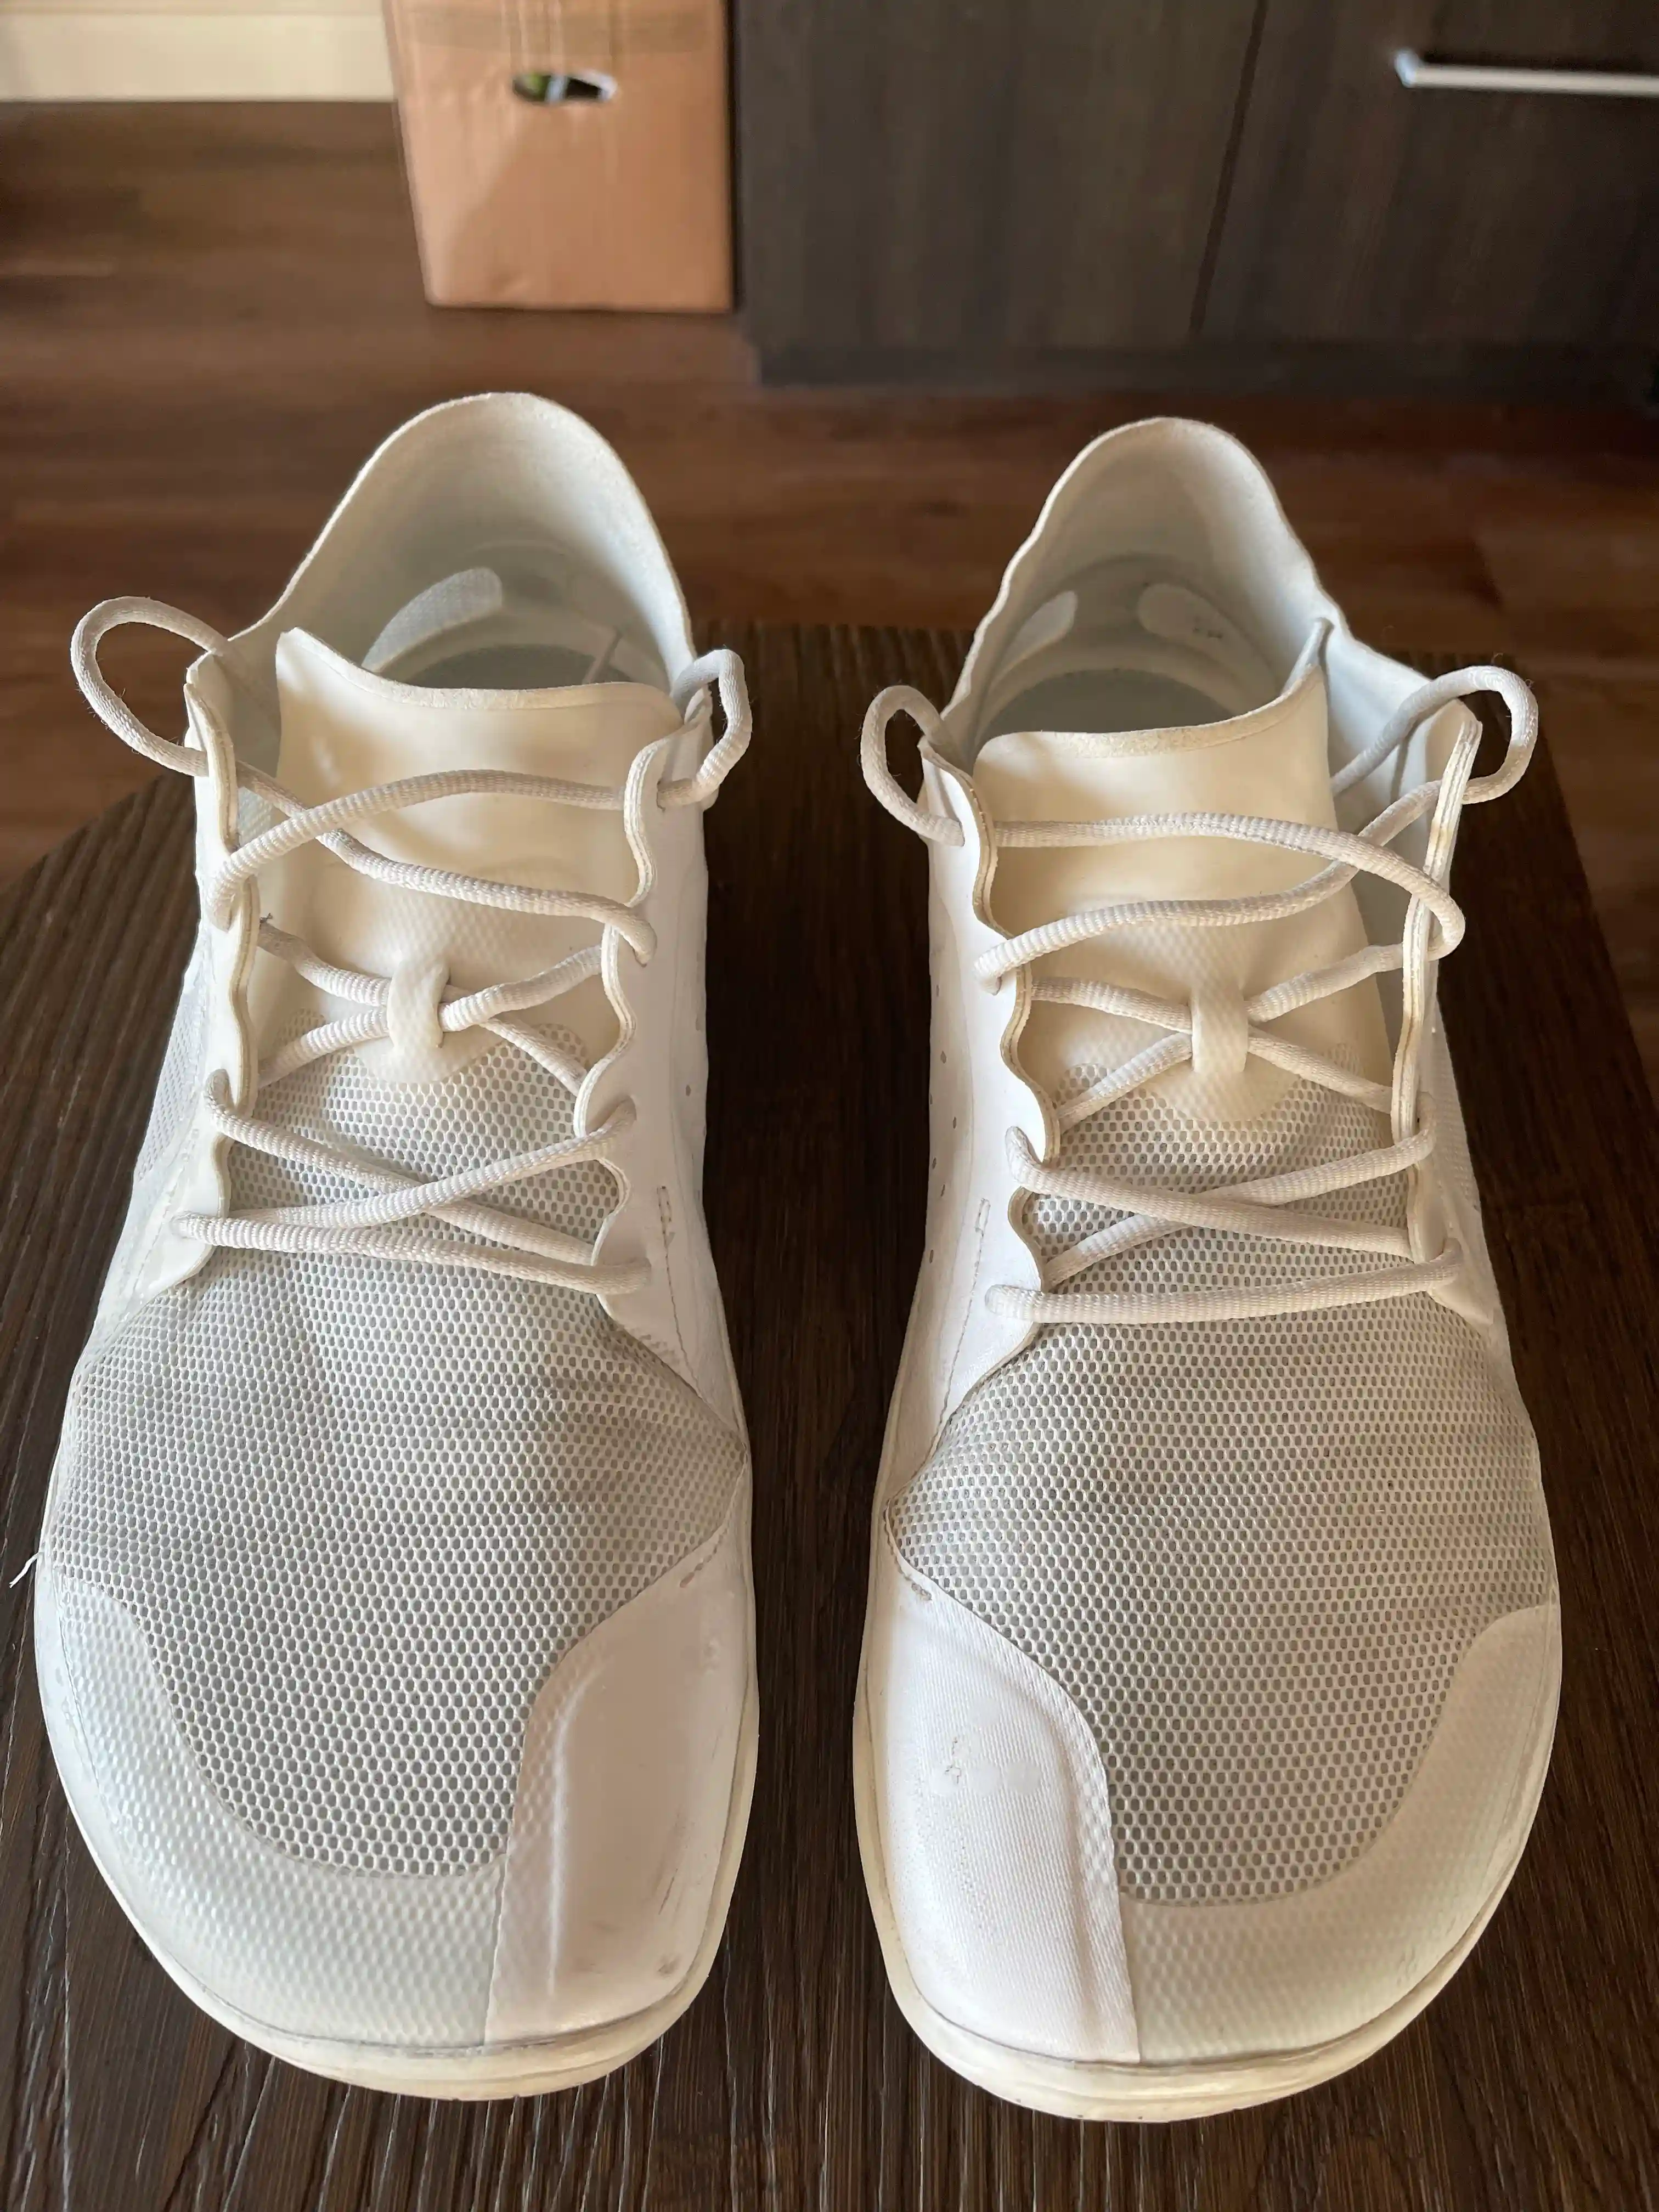 Vivobarefoot Primus Lite III Review - The Daily Grog